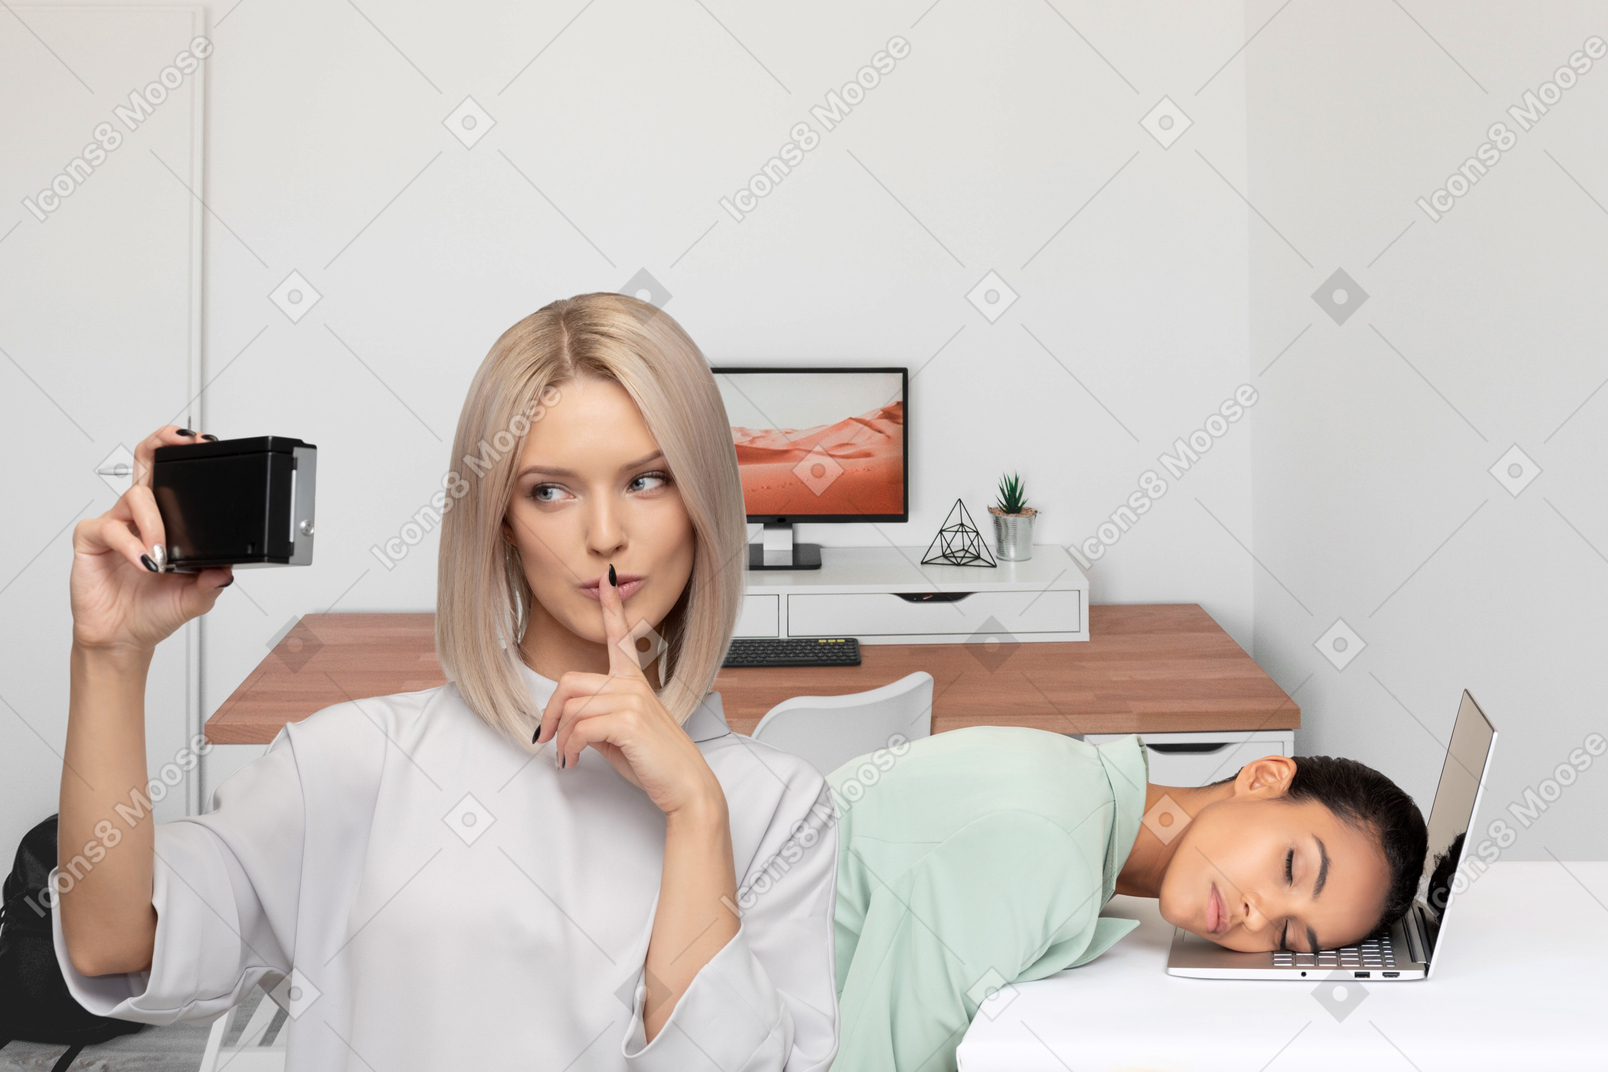 A woman taking a picture with a woman asleep on a laptop